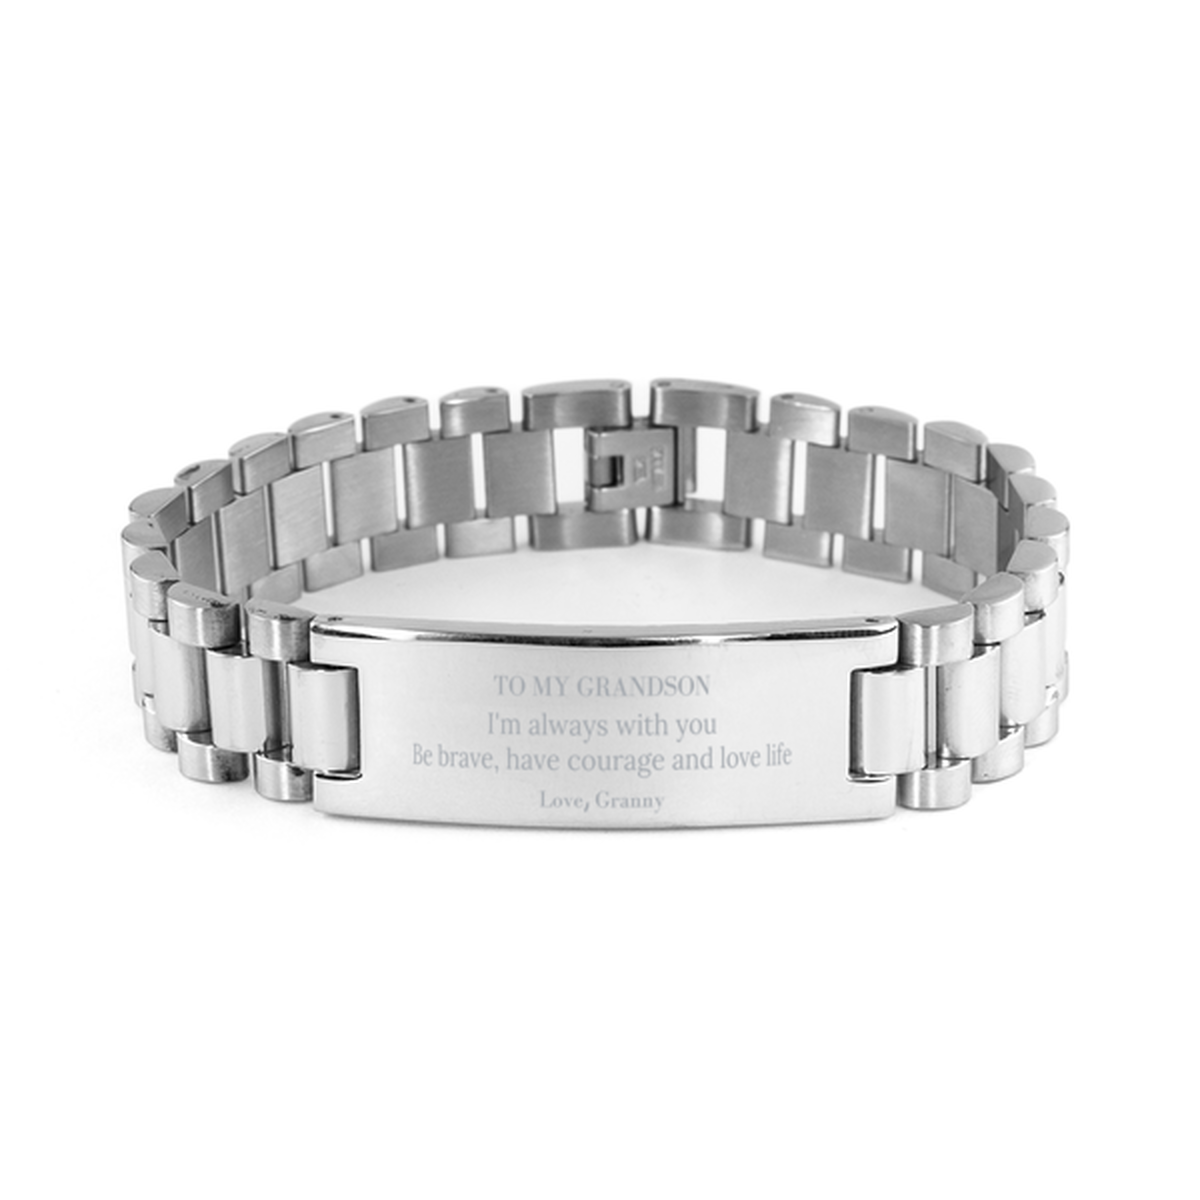 To My Grandson Gifts from Granny, Unique Ladder Stainless Steel Bracelet Inspirational Christmas Birthday Graduation Gifts for Grandson I'm always with you. Be brave, have courage and love life. Love, Granny